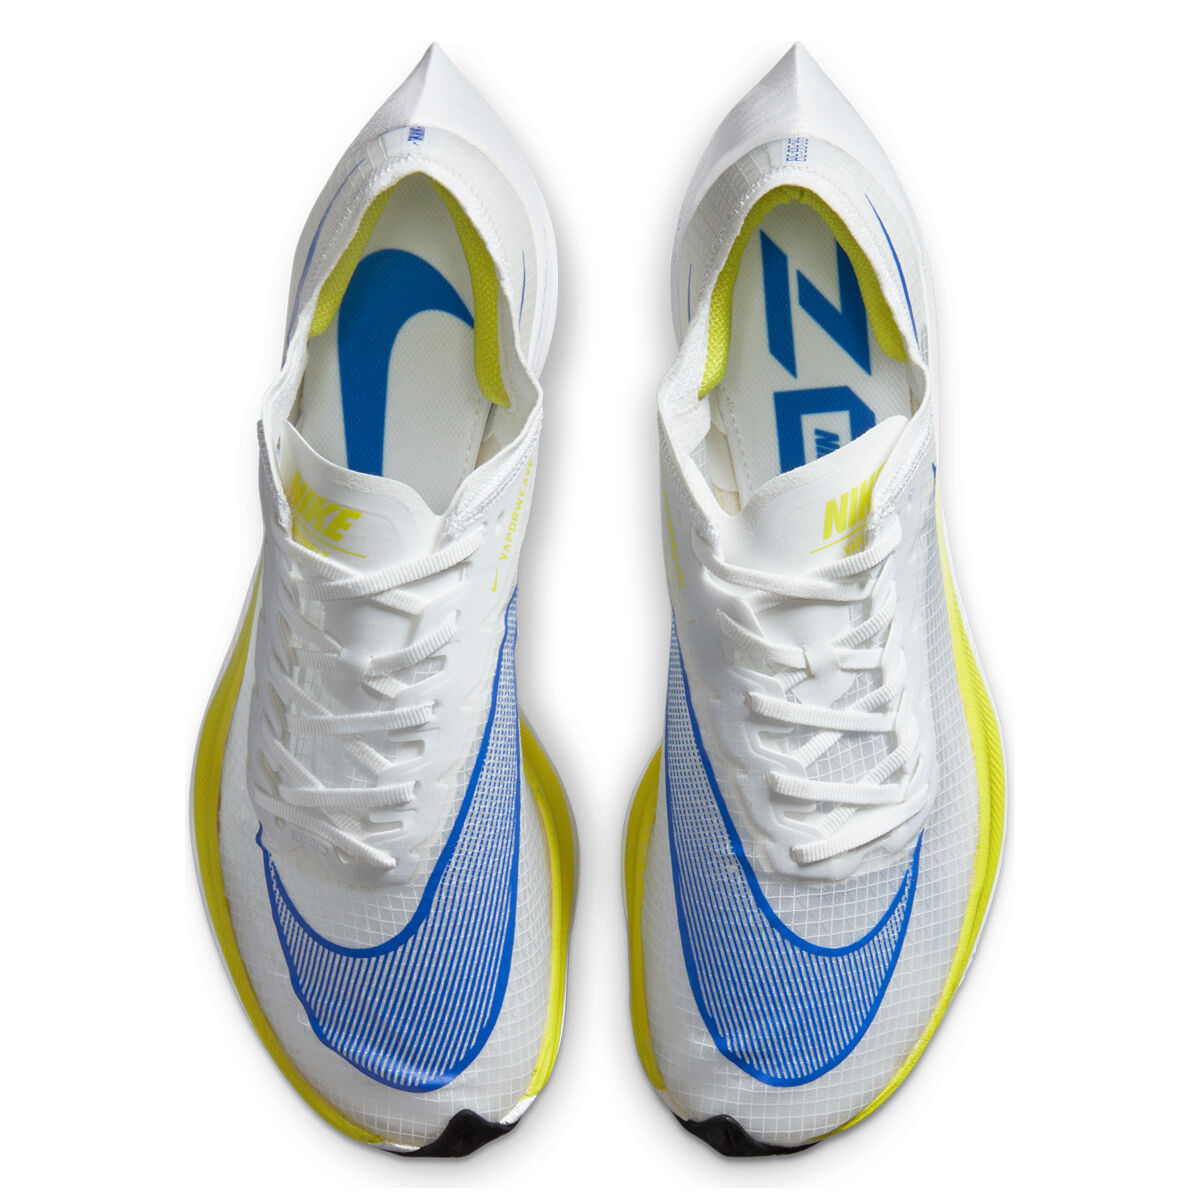 Nike Air ZoomX Vaporfly Next% Mens 